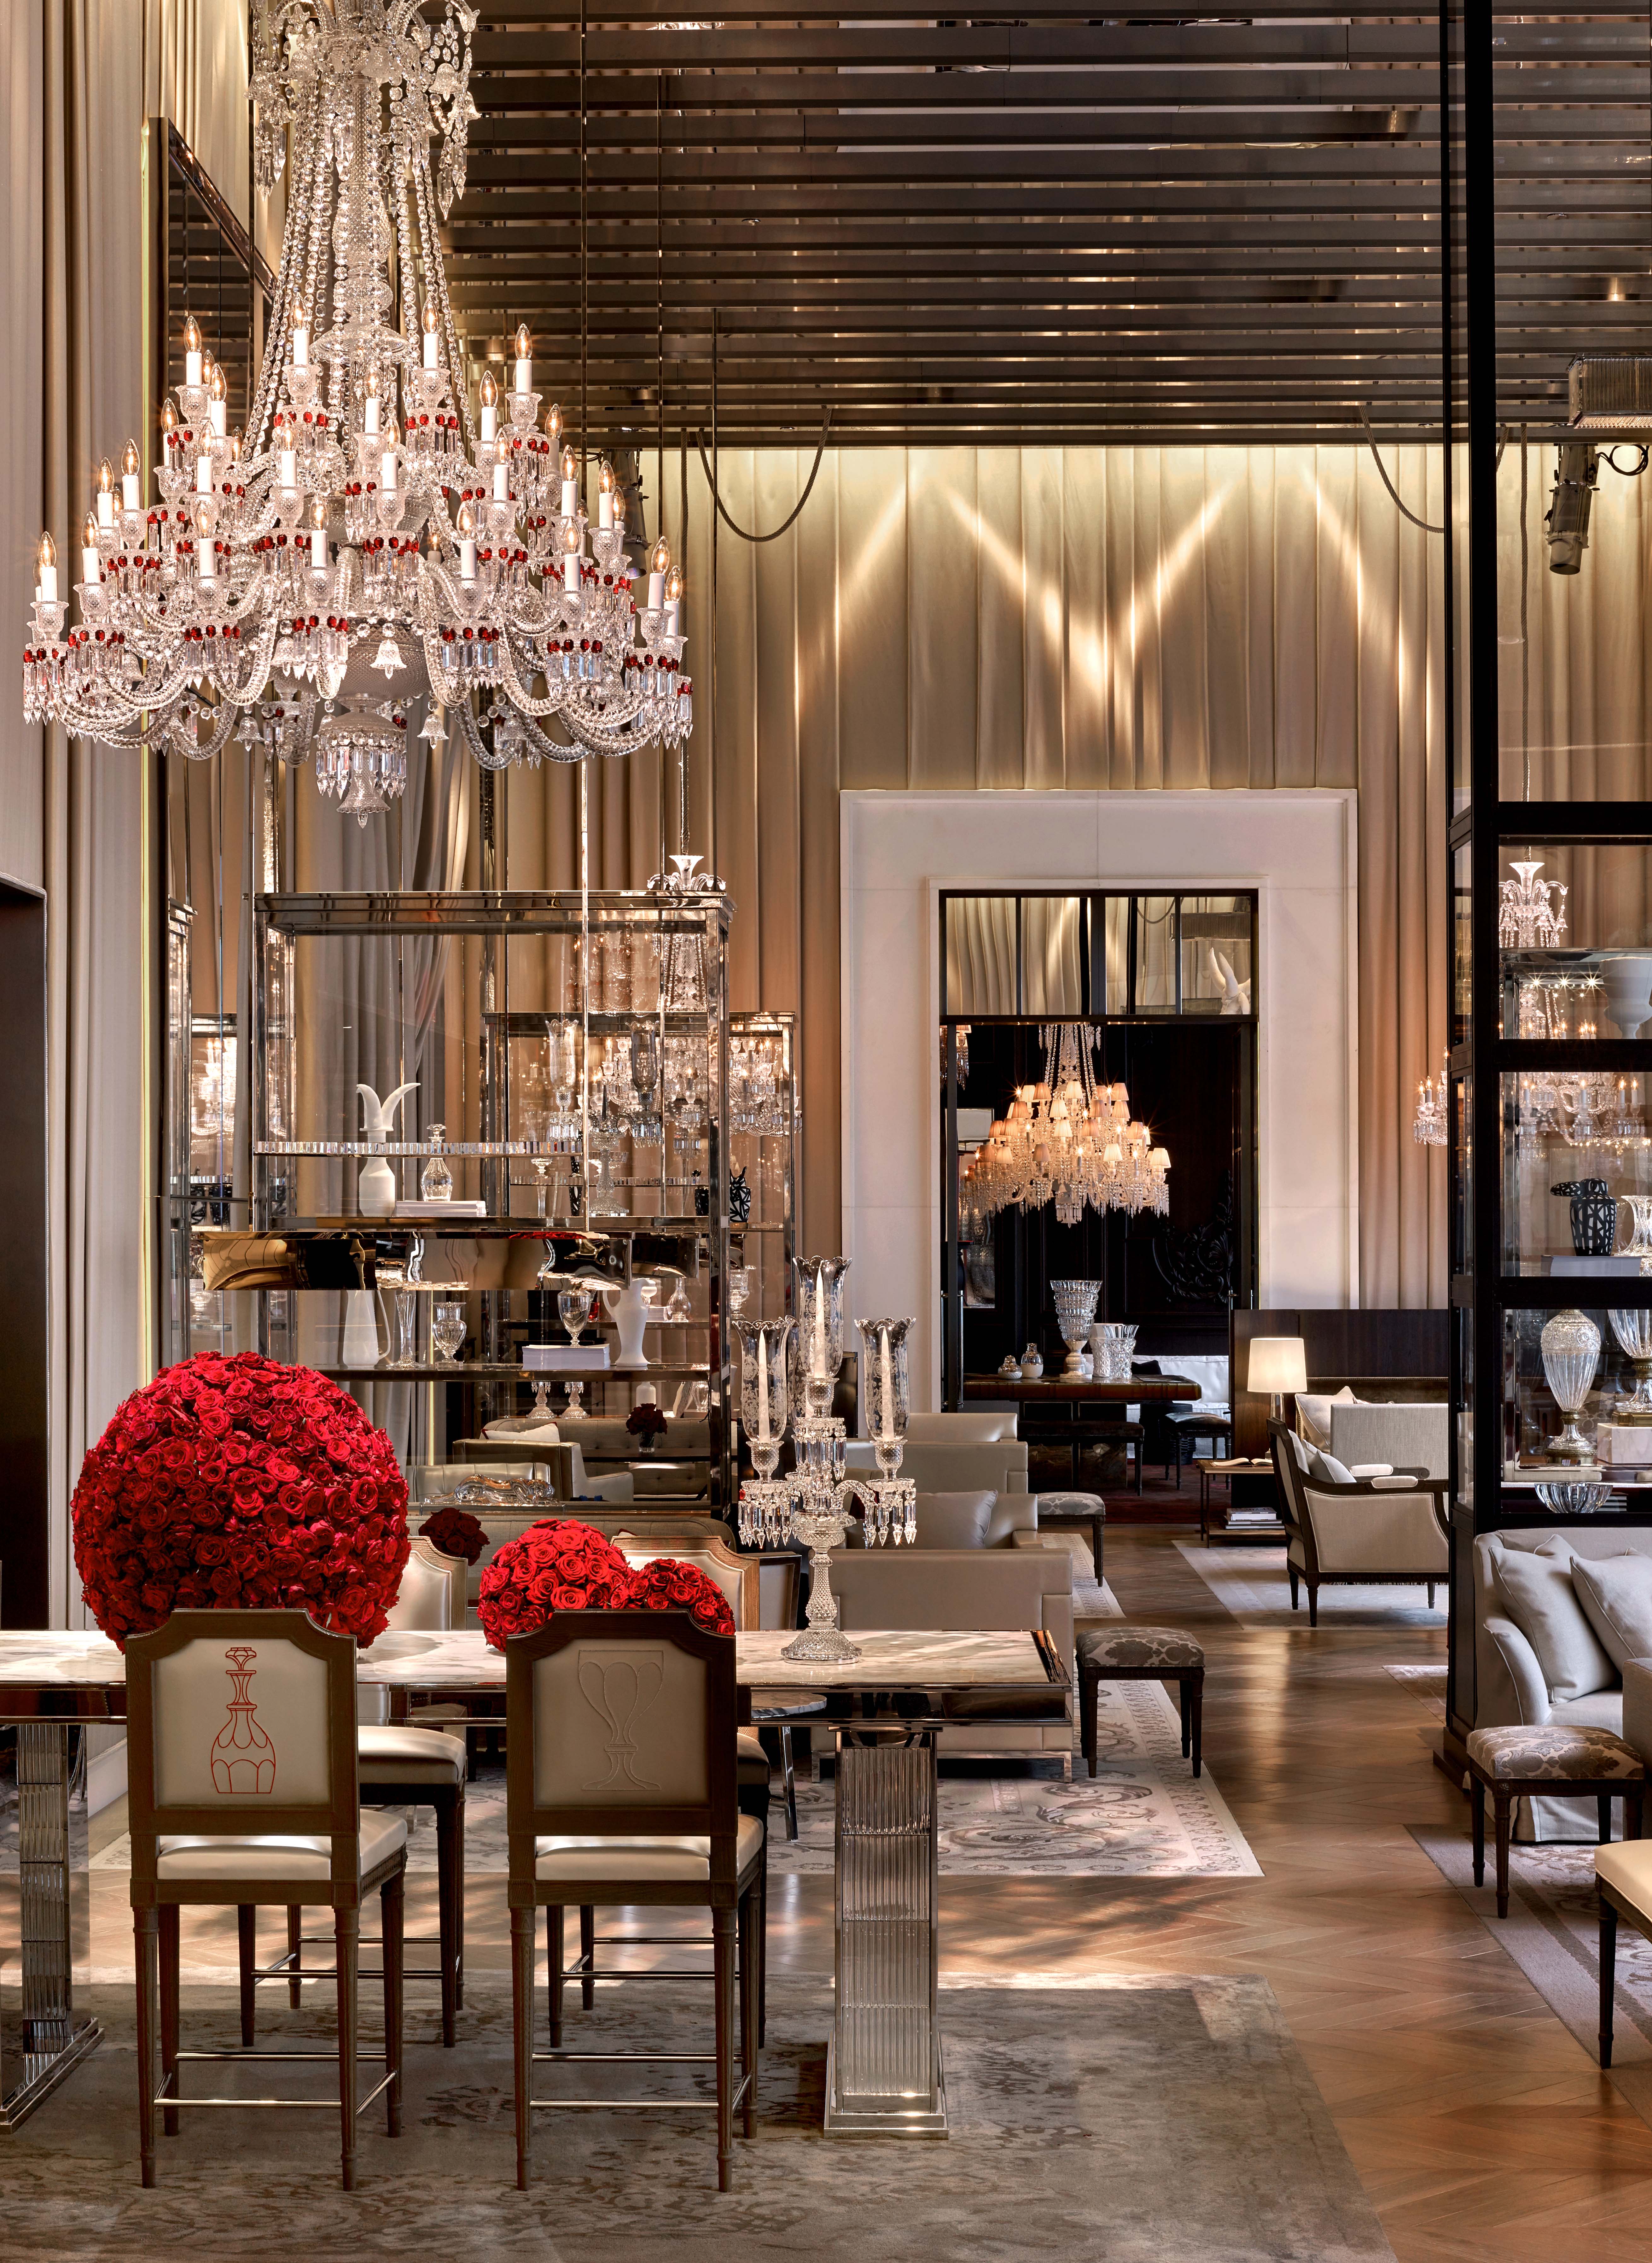 Mary Gostelow's Hotel of the Week: Baccarat Hotel New York - 'Oh the